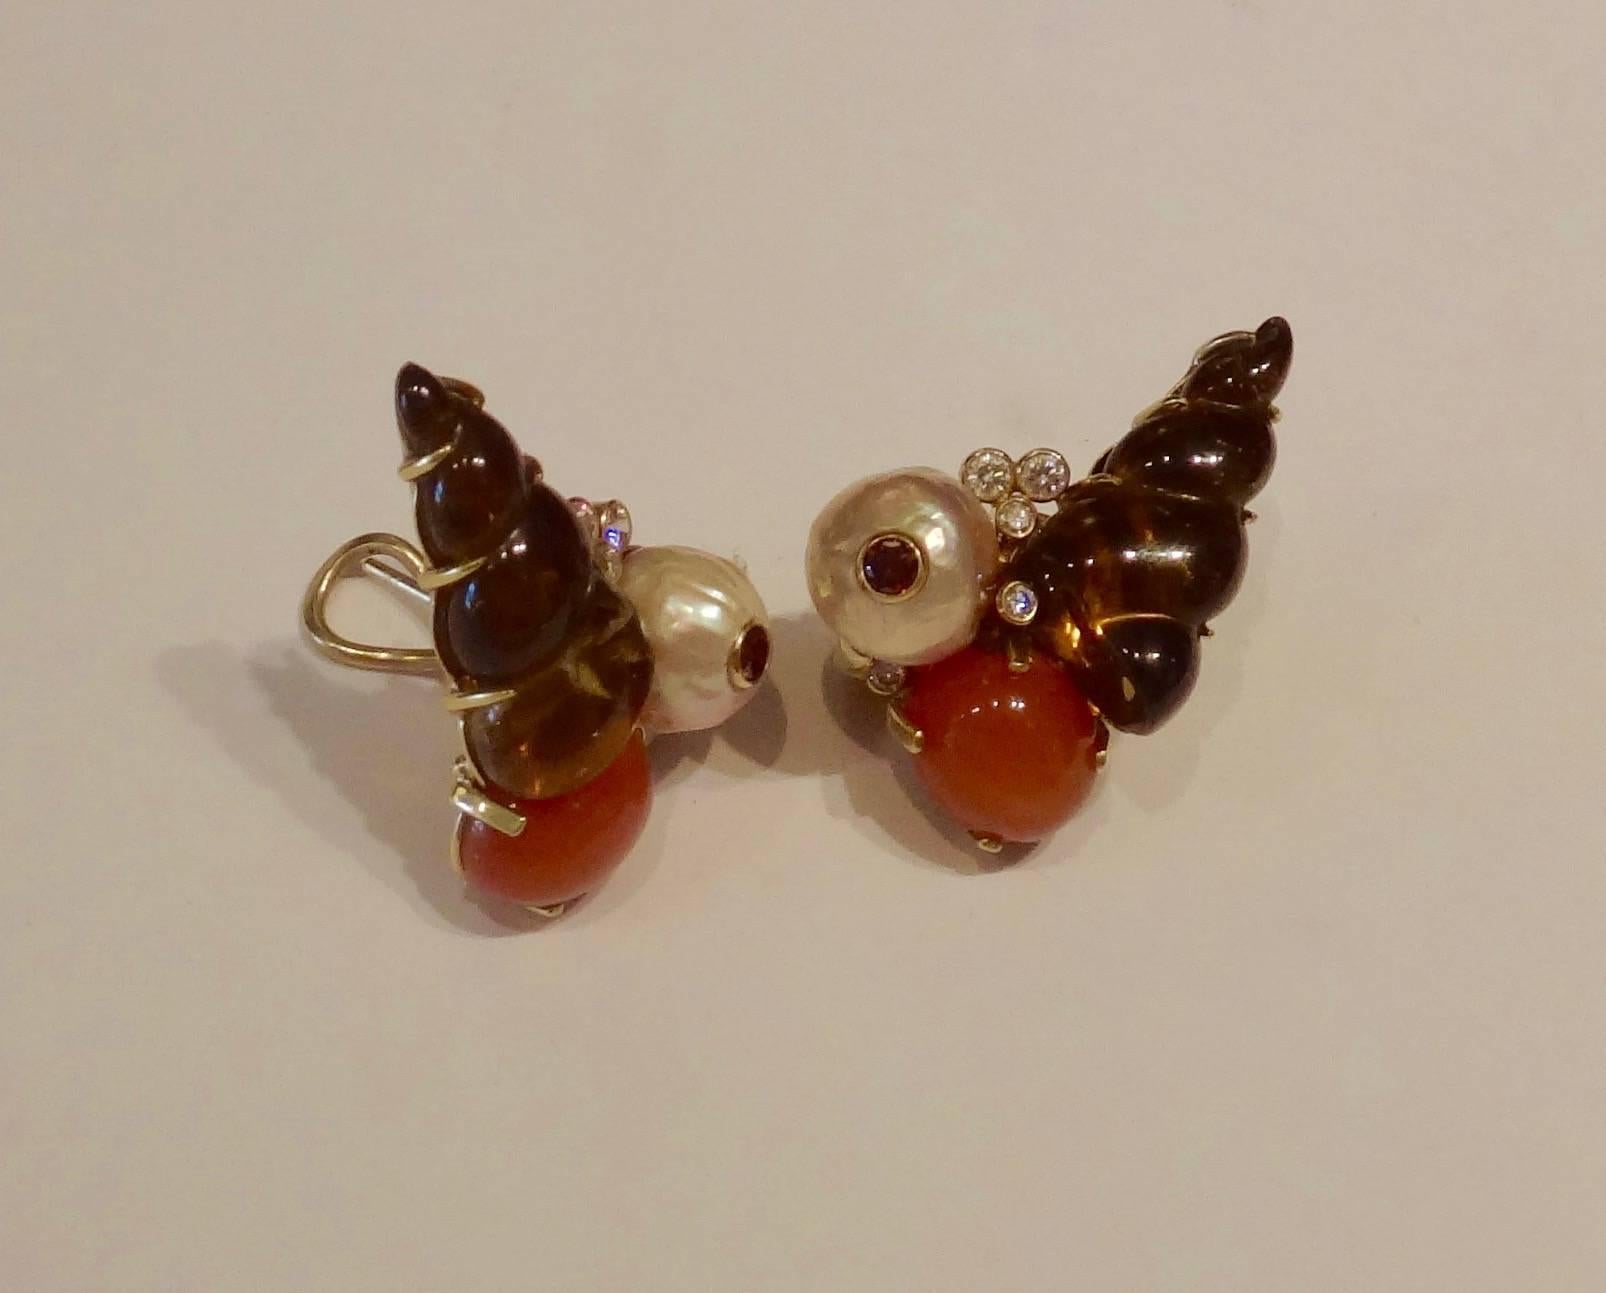 Carved in the form of shells, these richly colored citrines are combined with peach  moonstones and pink Kasumi pearls (origin: Lake Kasumi, Japan) along with cognac colored and white diamonds in these 